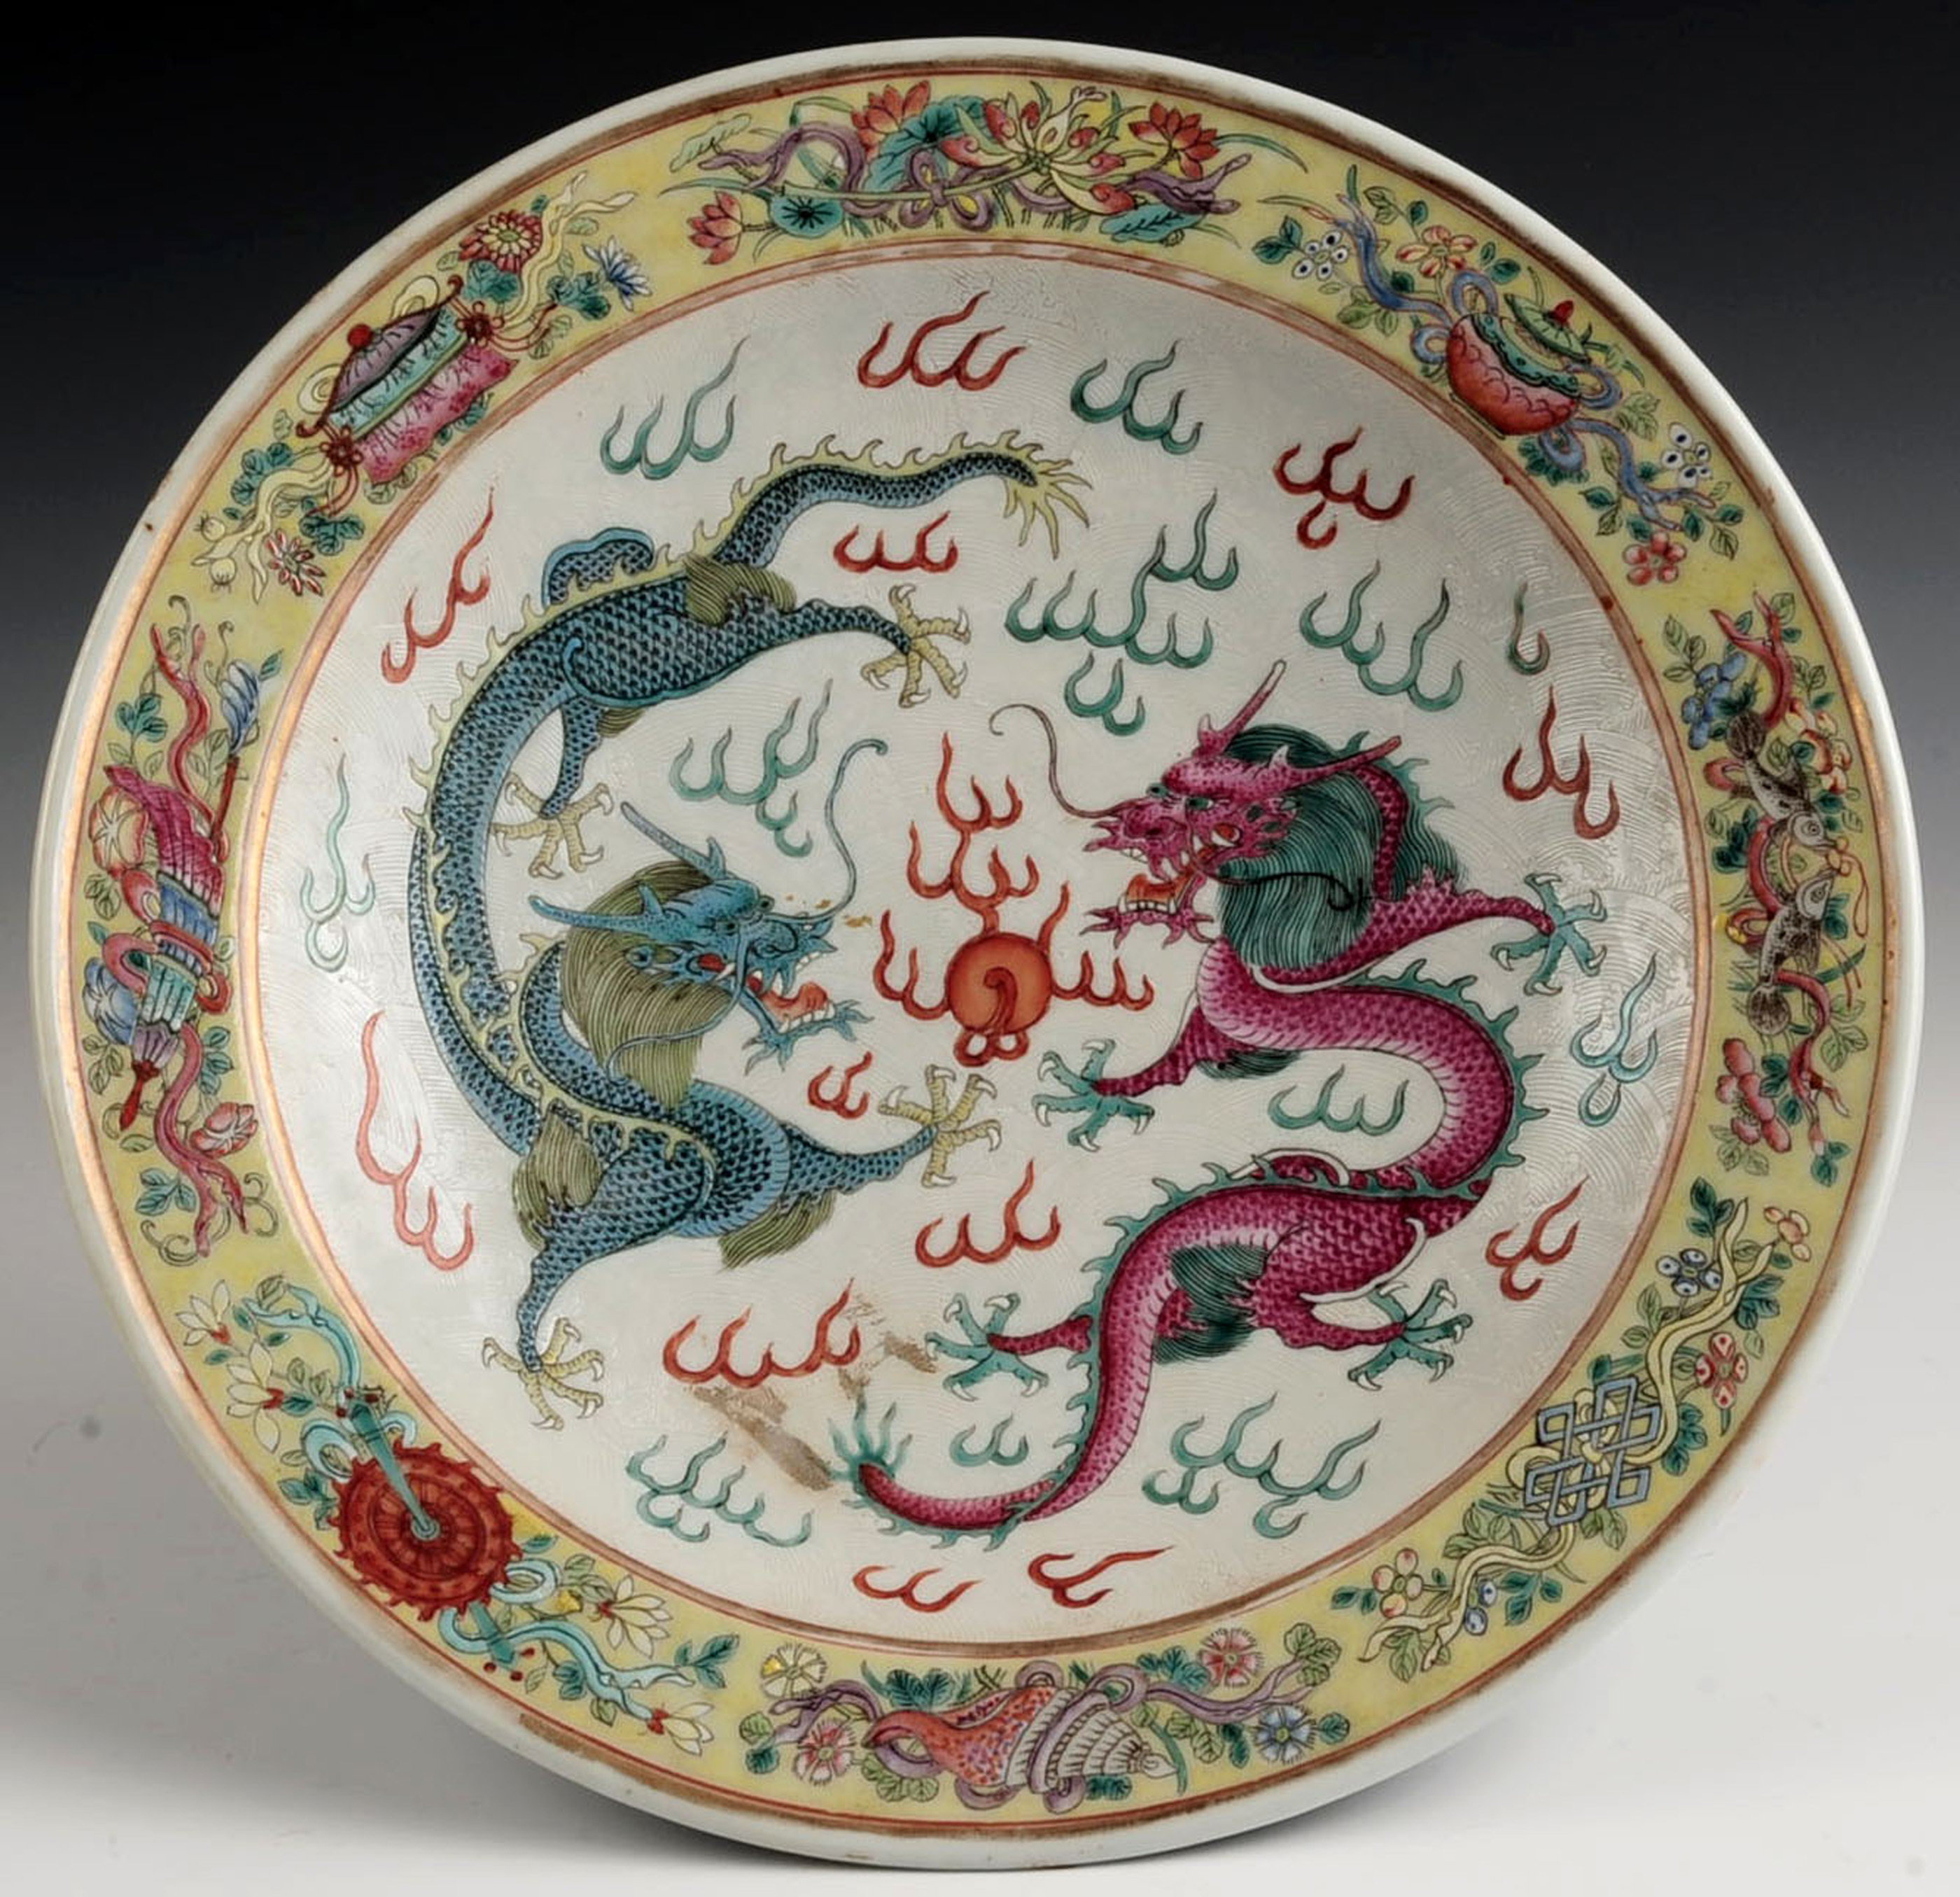 A LATE QING / EARLY REPUBLIC CHINESE DRAGON DISH